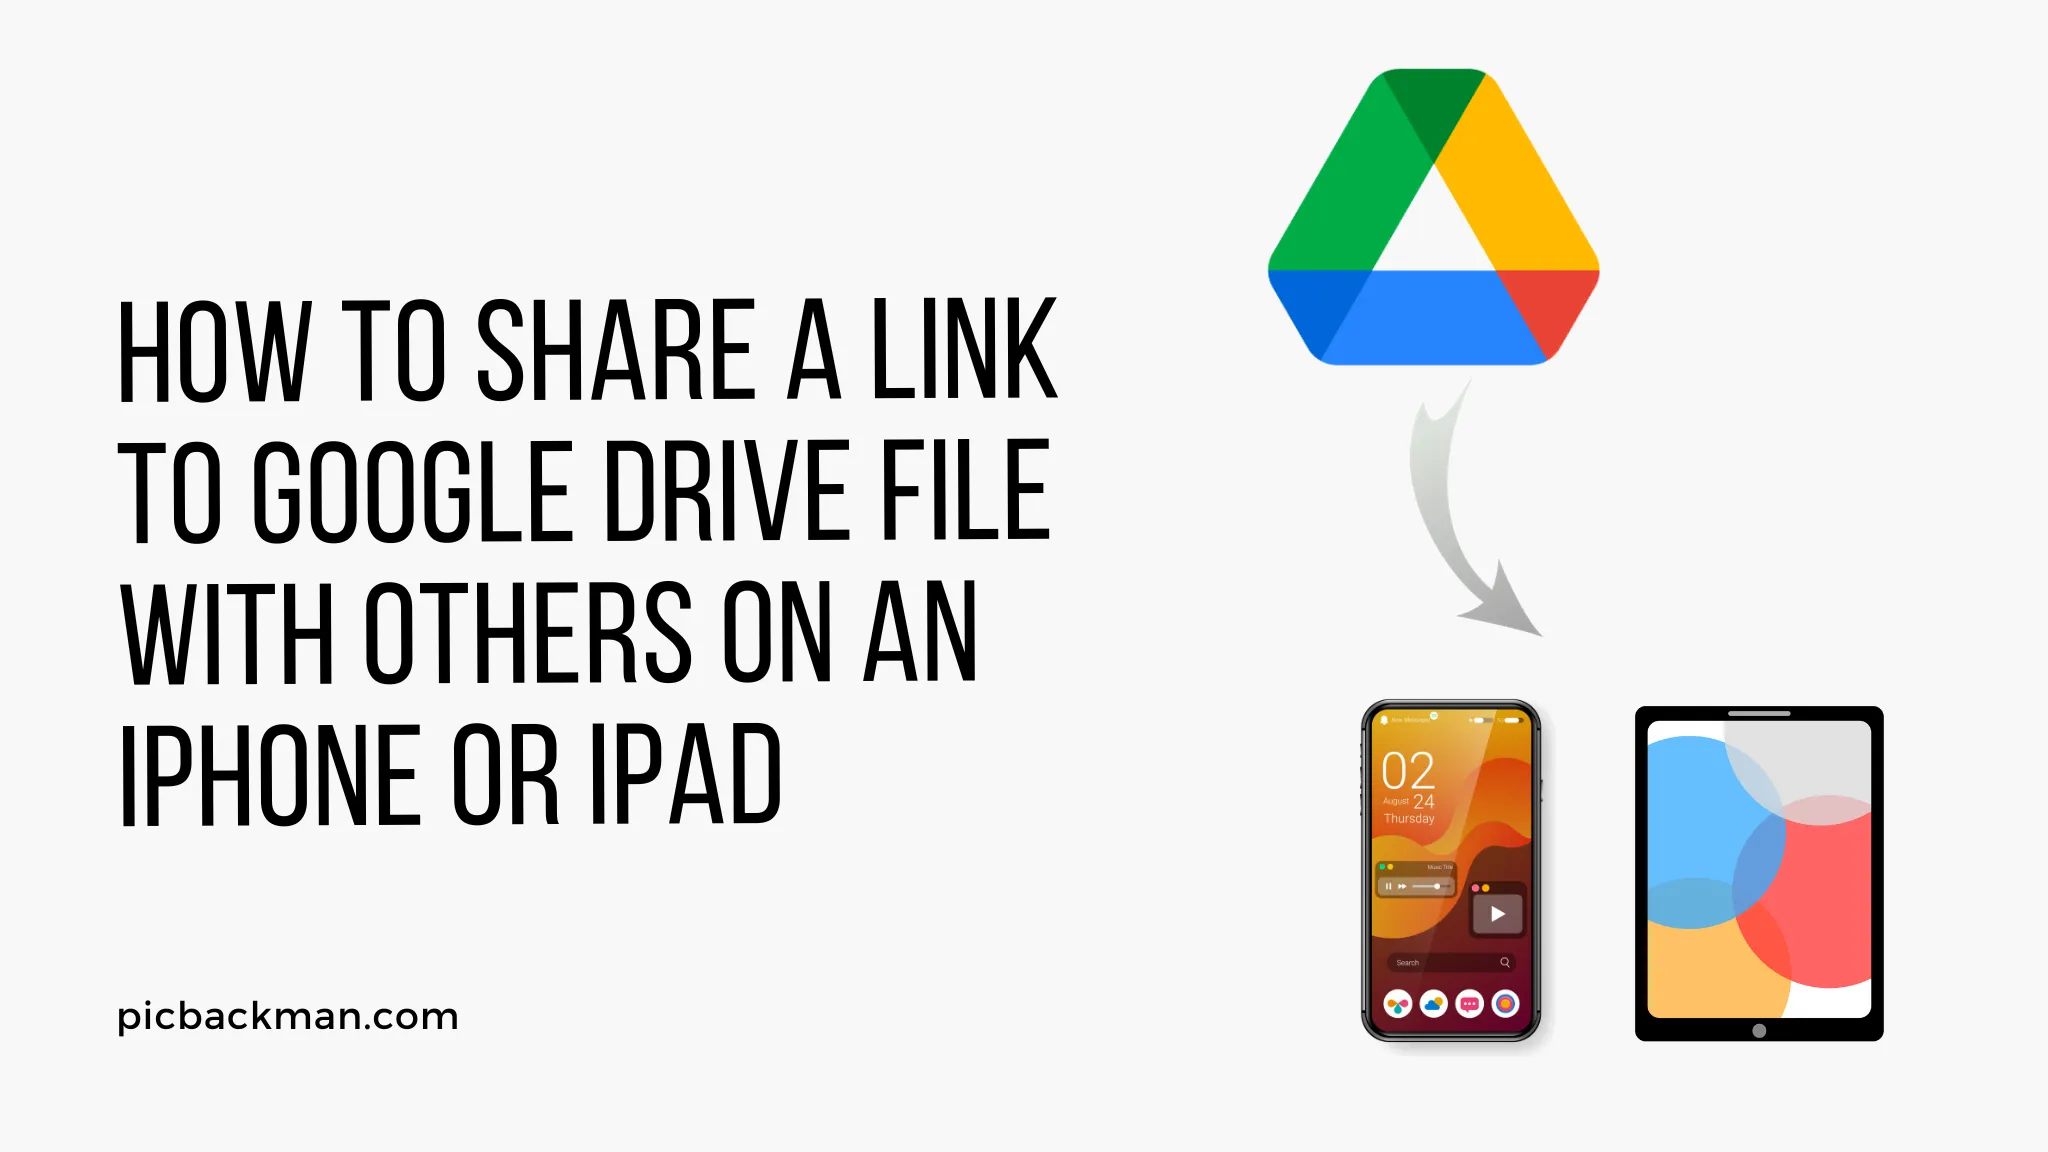 How to Share a Link to Google Drive File with others on an iPhone or iPad?